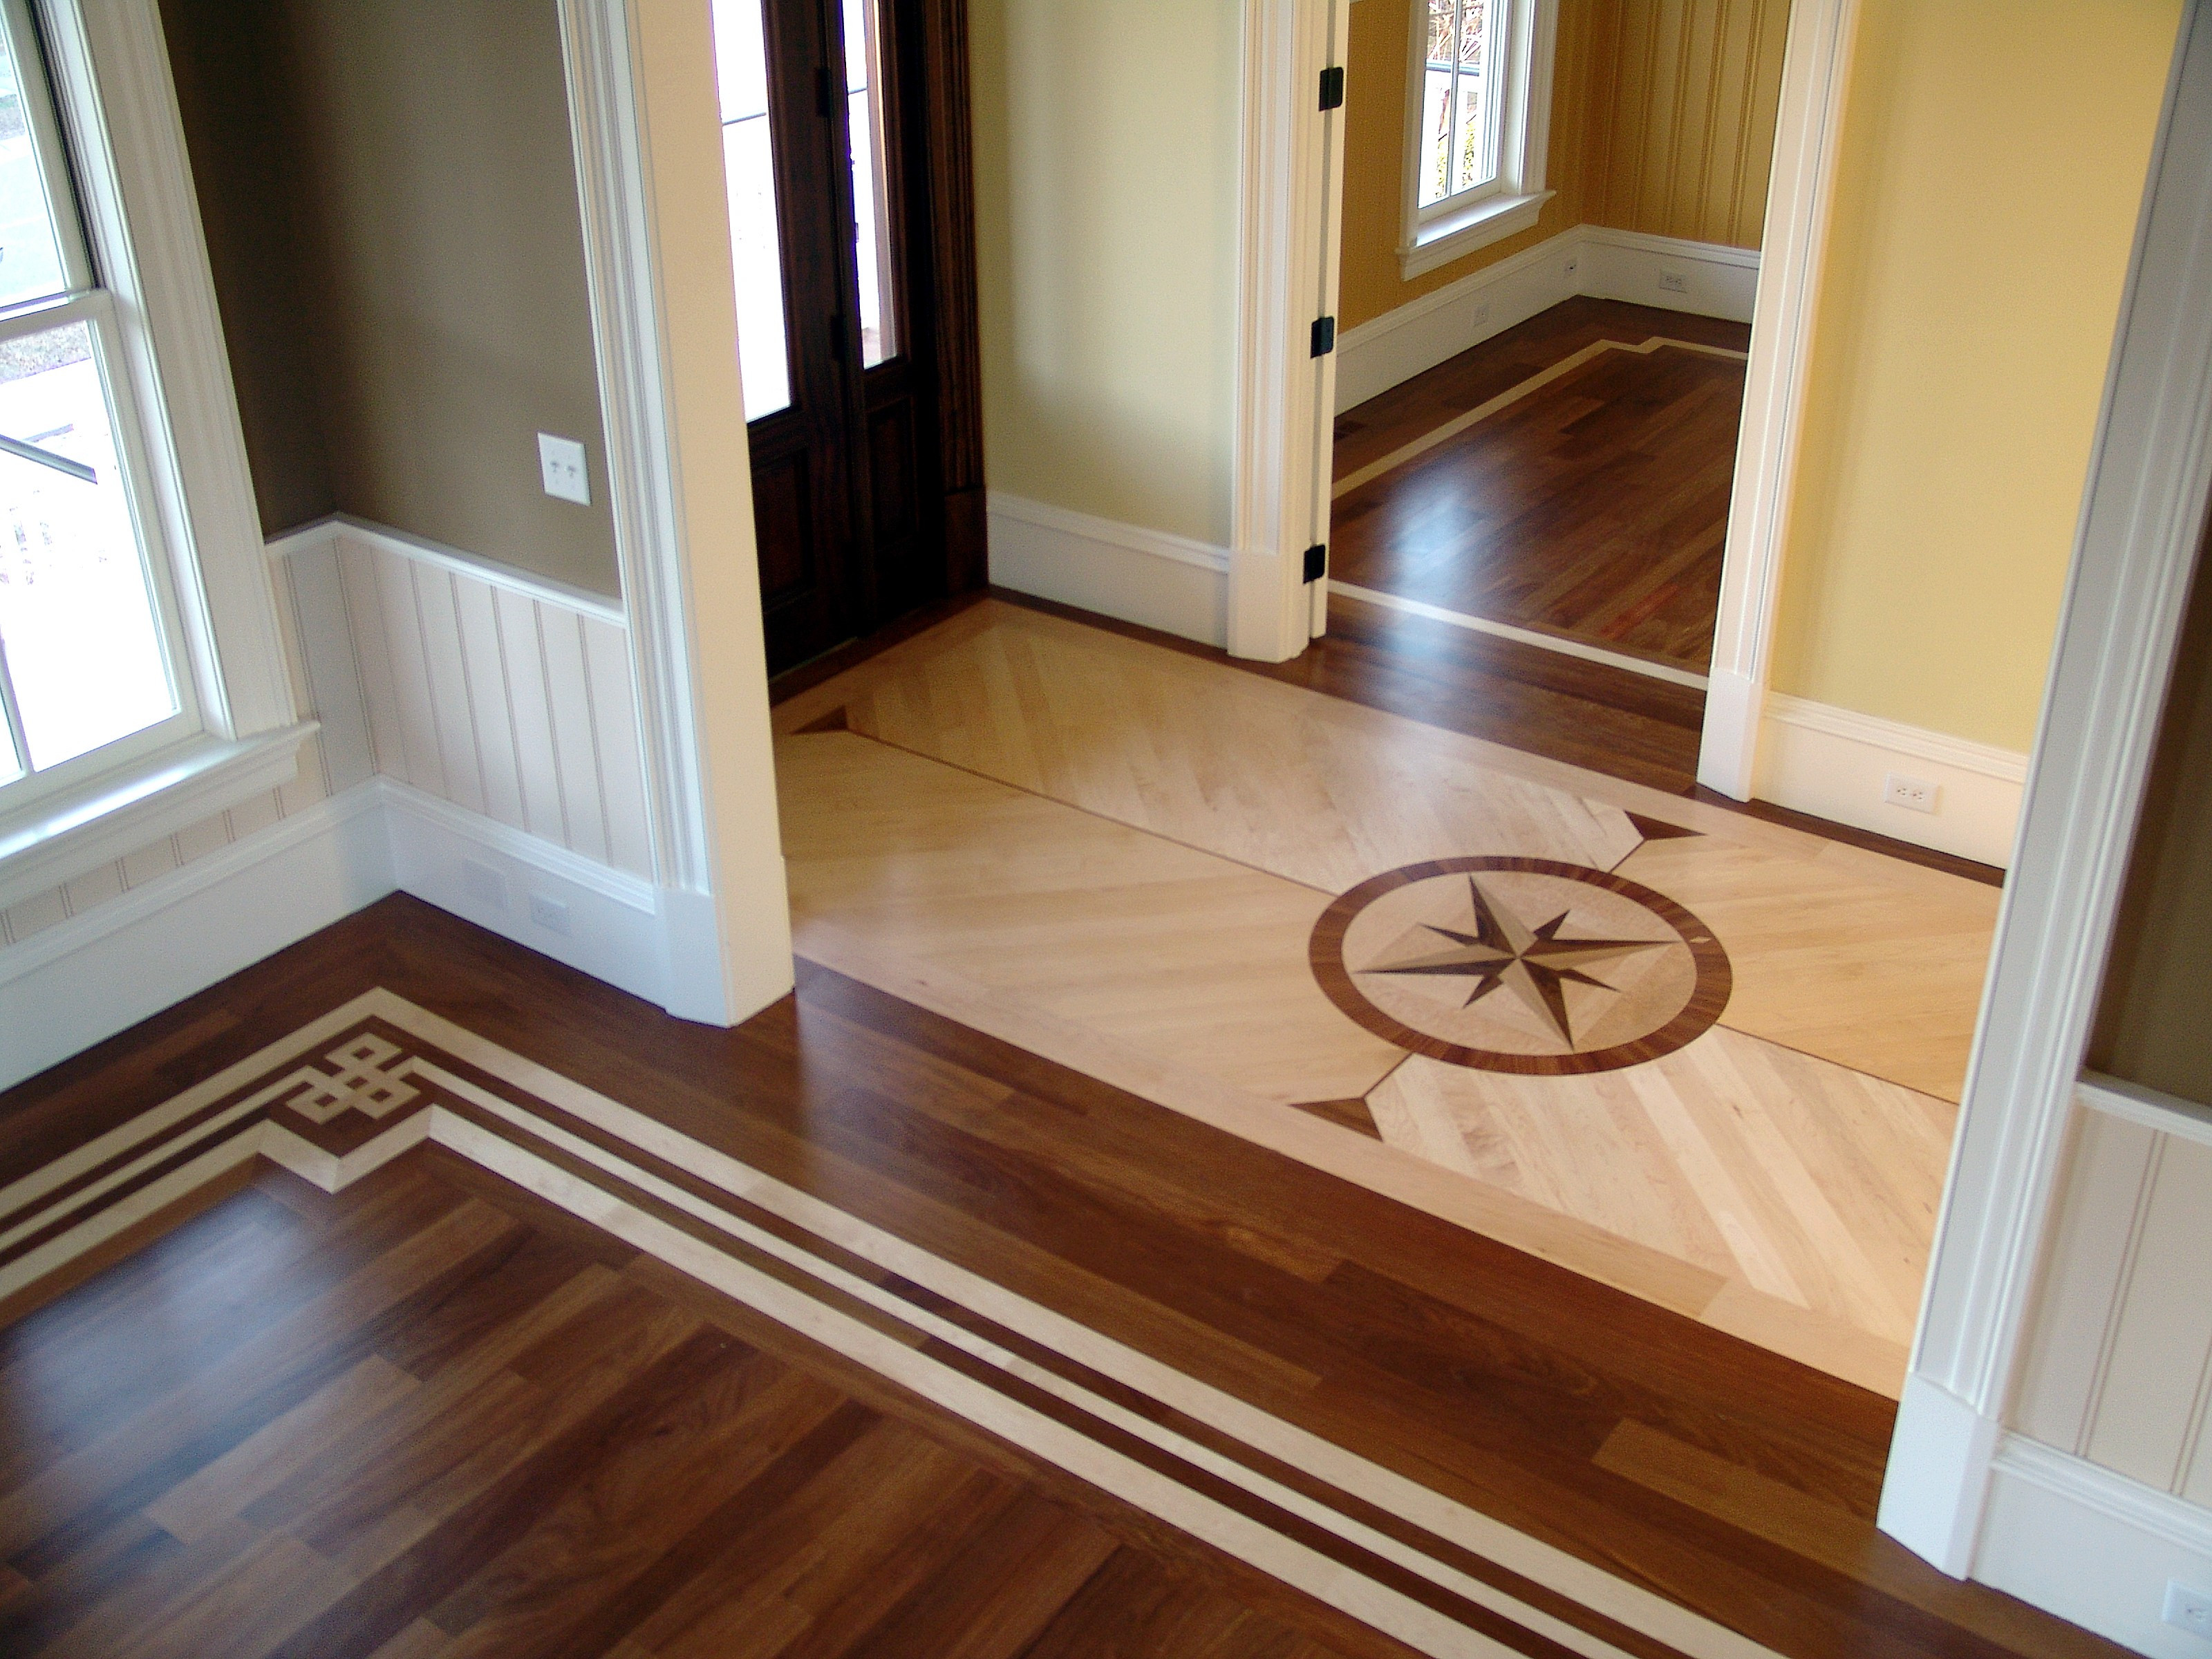 17 attractive How to Stain Hardwood Floors Video 2024 free download how to stain hardwood floors video of imperial wood floors madison wi hardwood floors hardwood floor with home a